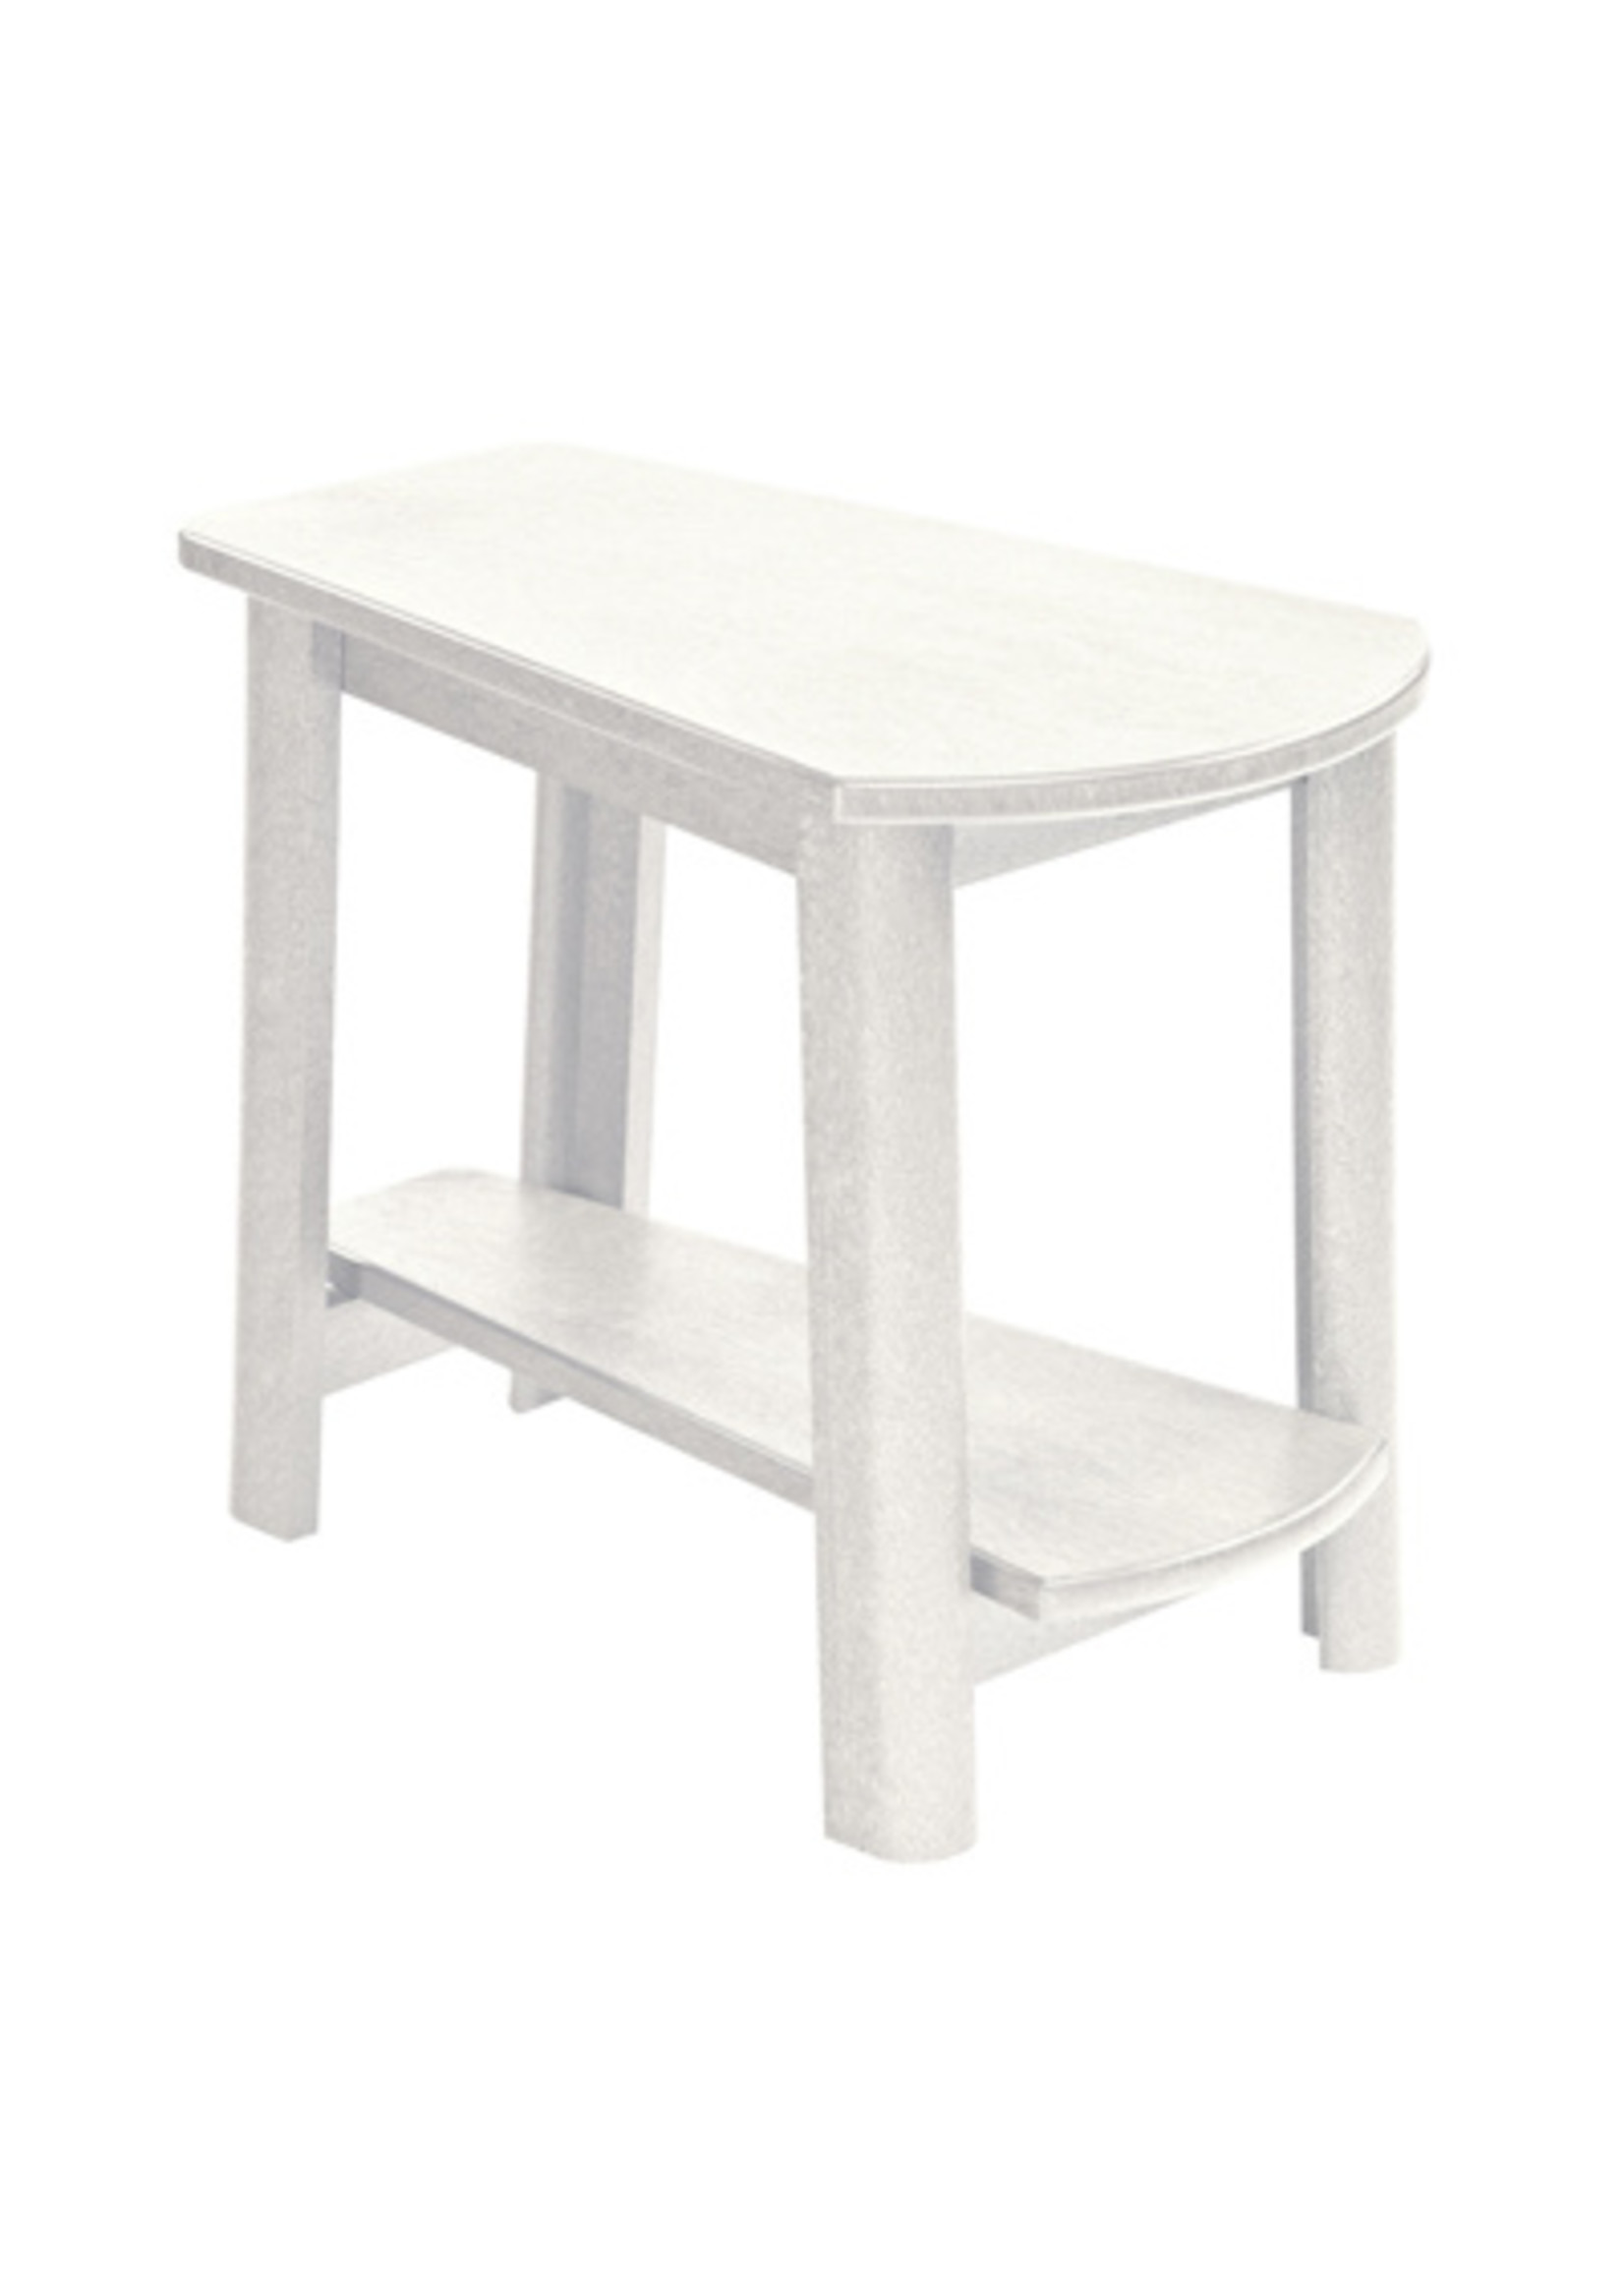 C.R. Plastic Products 181.T04 * Addy Side Table, Generation Line